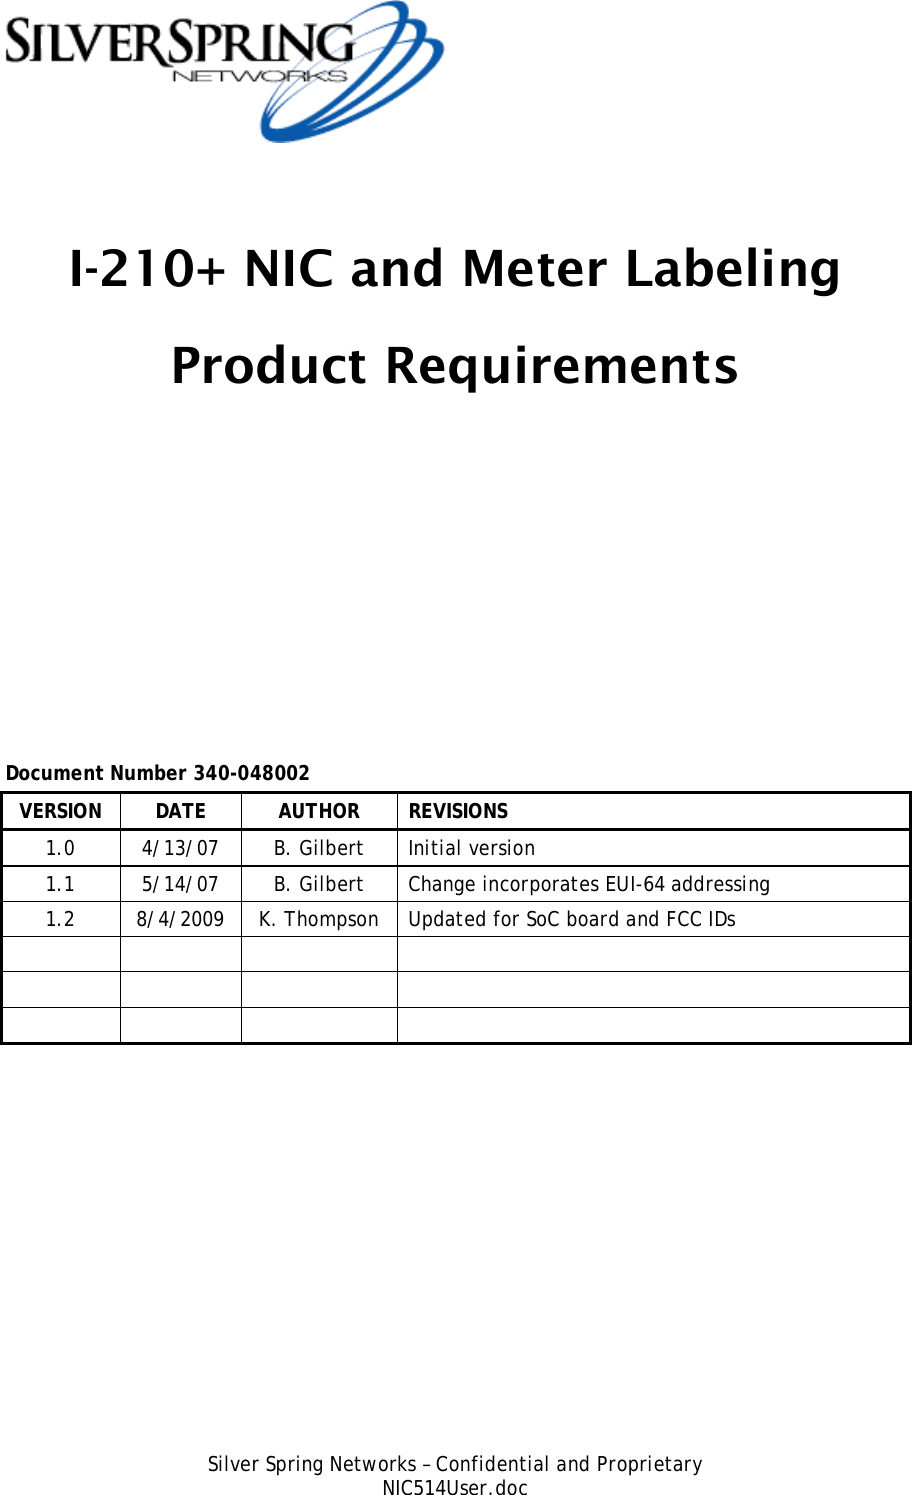  Silver Spring Networks – Confidential and Proprietary NIC514User.doc  I-210+ NIC and Meter Labeling Product Requirements                Document Number 340-048002 VERSION DATE  AUTHOR REVISIONS 1.0  4/13/07  B. Gilbert  Initial version 1.1  5/14/07  B. Gilbert  Change incorporates EUI-64 addressing 1.2  8/4/2009  K. Thompson  Updated for SoC board and FCC IDs                 